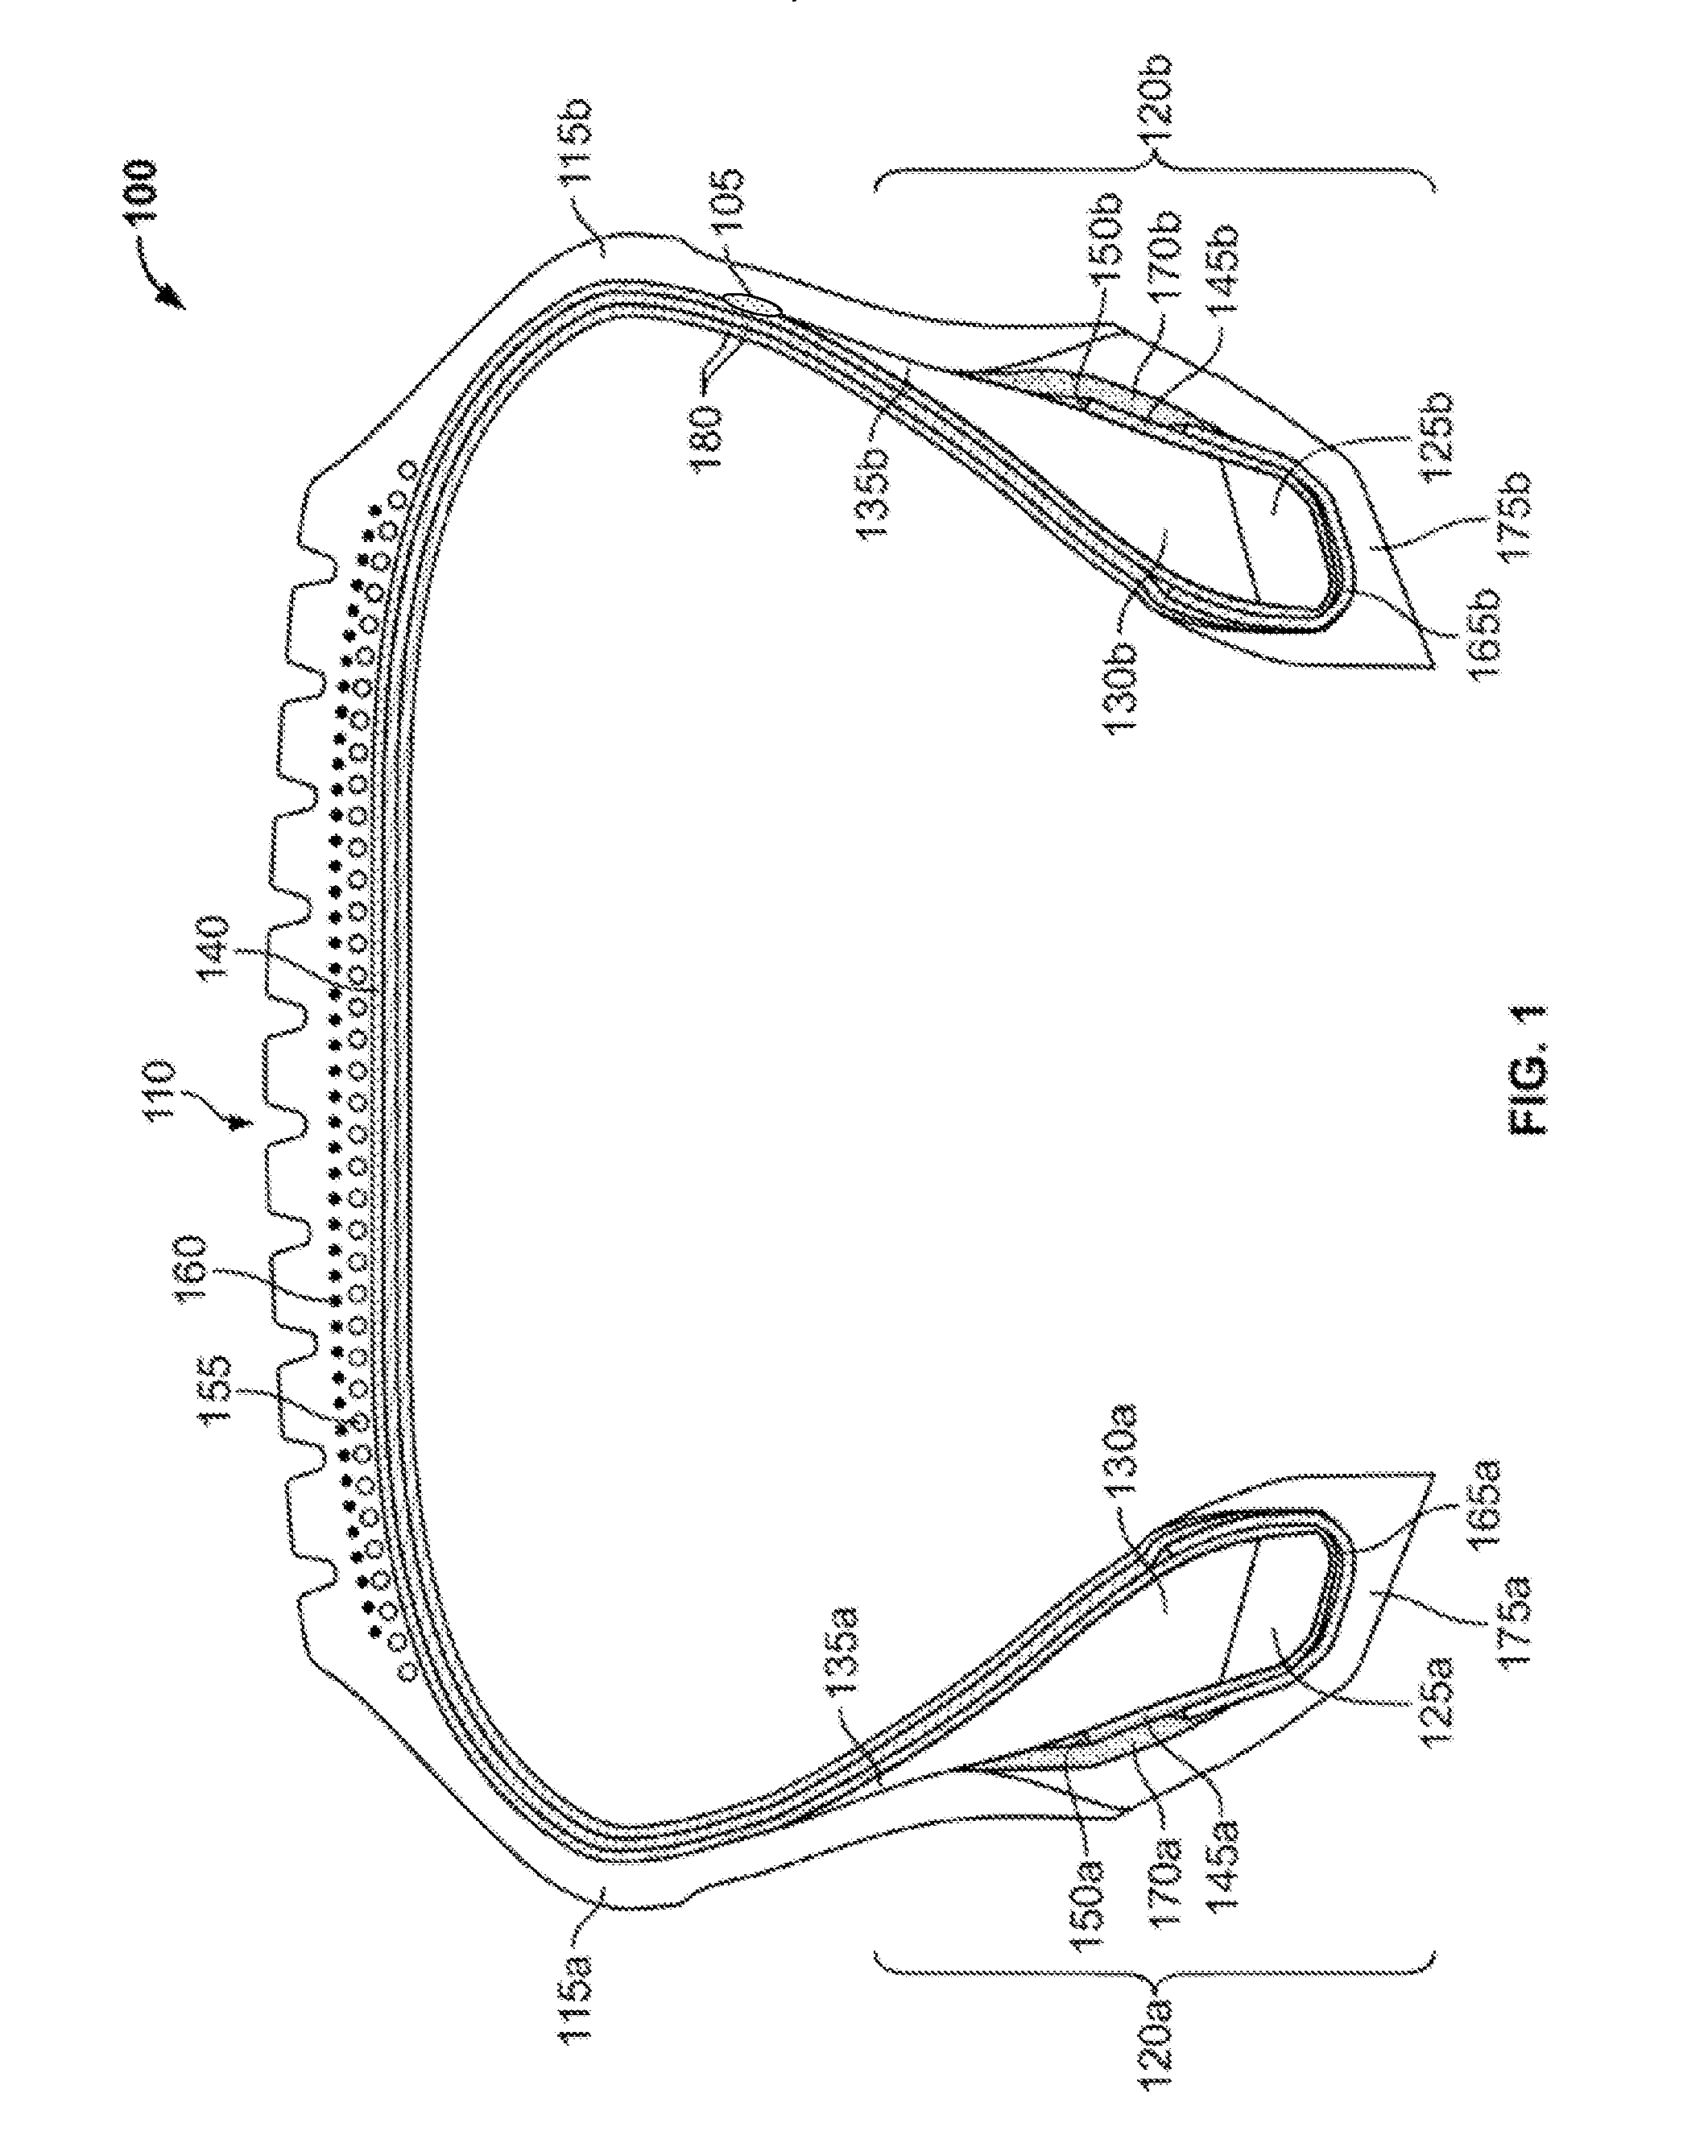 Tire having embedded electronic device affixed with adhesive